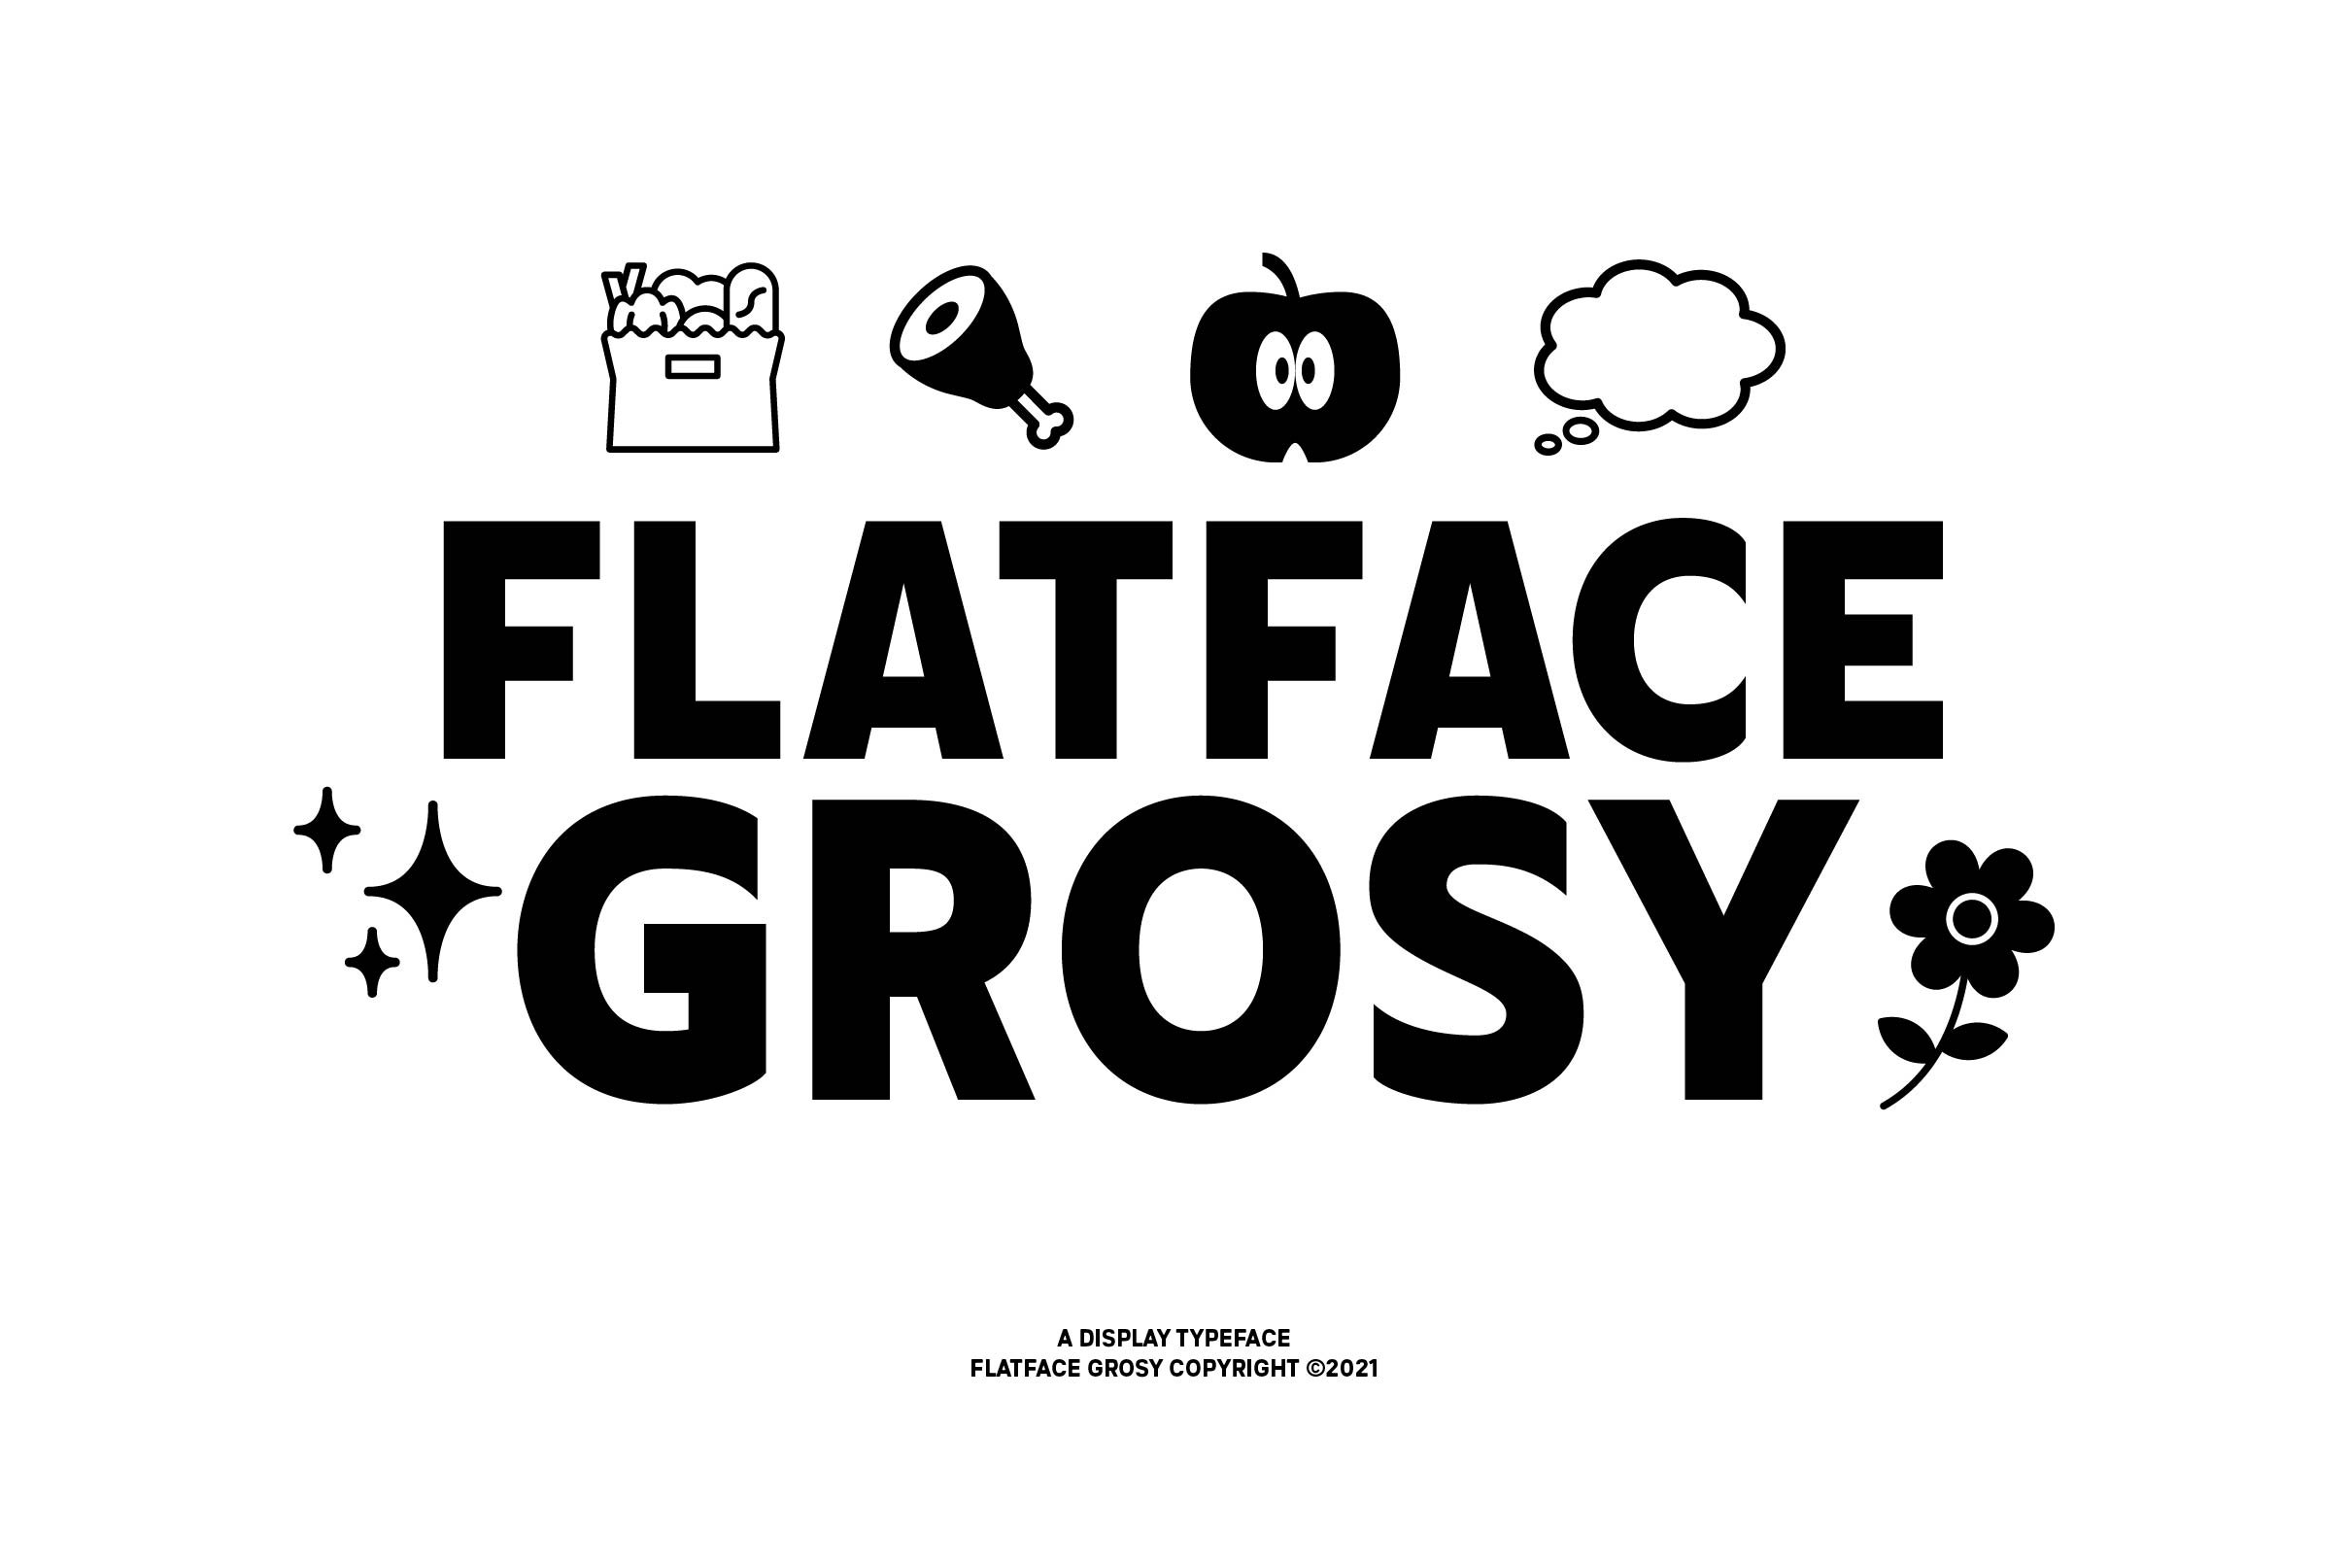 Flatface Grosy cover image.